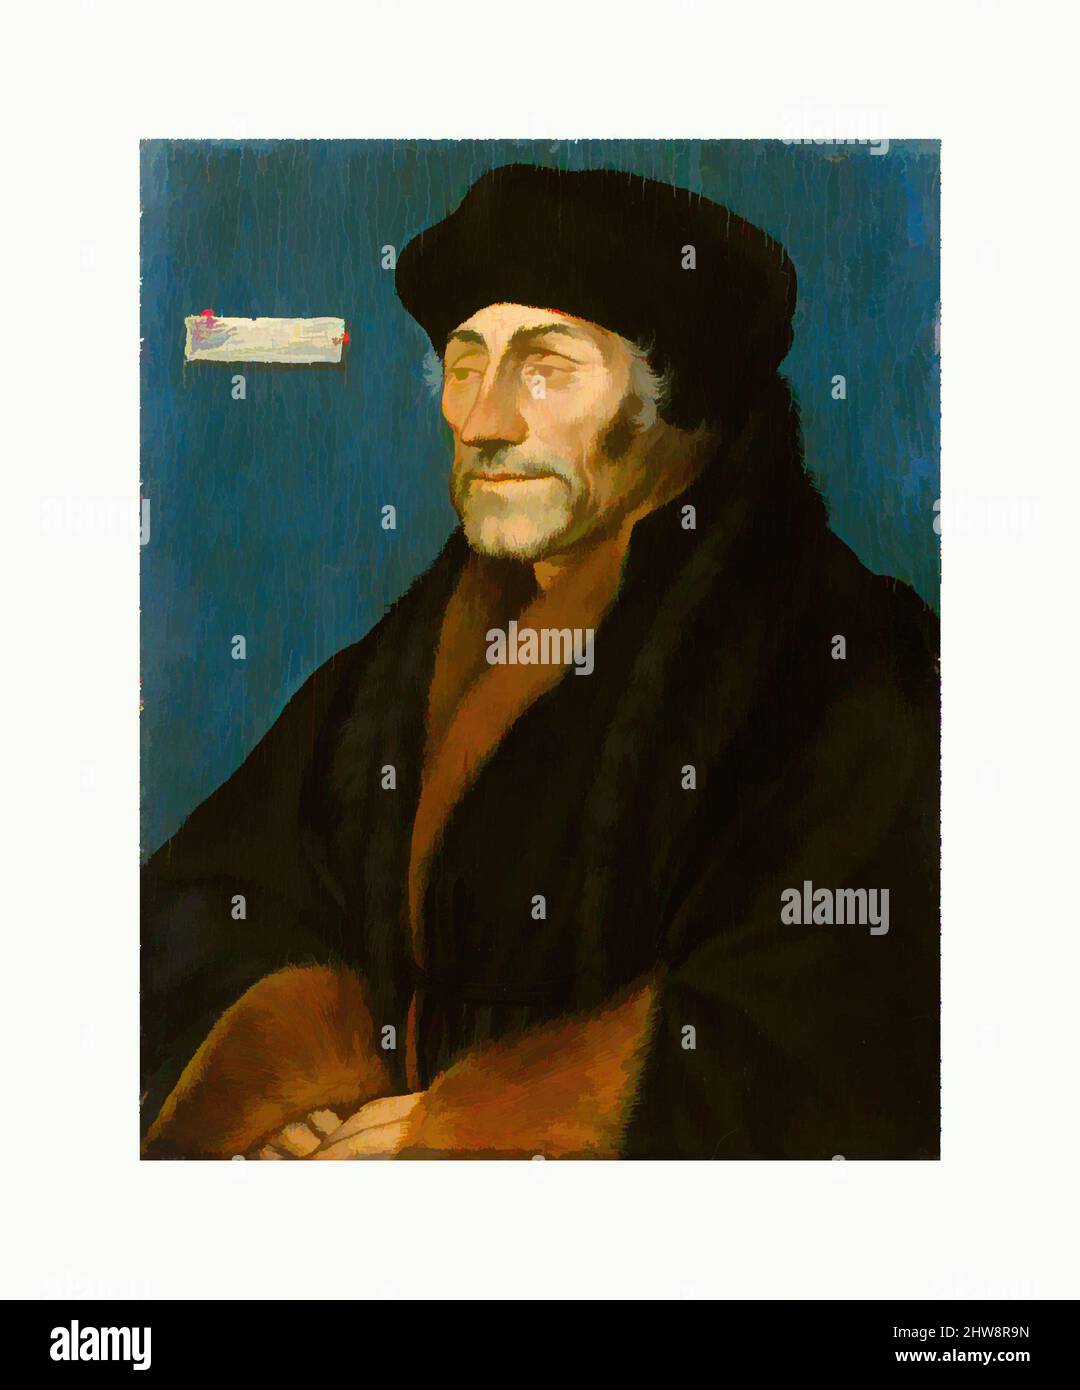 Art inspired by Erasmus of Rotterdam, ca. 1532, Oil on linden panel, 7 1/4 x 5 9/16 in. (18.4 x 14.2 cm); painted surface 6 15/16 x 5 1/2 in. (17.6 x 14 cm), Paintings, Hans Holbein the Younger (German, Augsburg 1497/98–1543 London) (and Workshop(?)), Hans Holbein the Younger was one, Classic works modernized by Artotop with a splash of modernity. Shapes, color and value, eye-catching visual impact on art. Emotions through freedom of artworks in a contemporary way. A timeless message pursuing a wildly creative new direction. Artists turning to the digital medium and creating the Artotop NFT Stock Photo